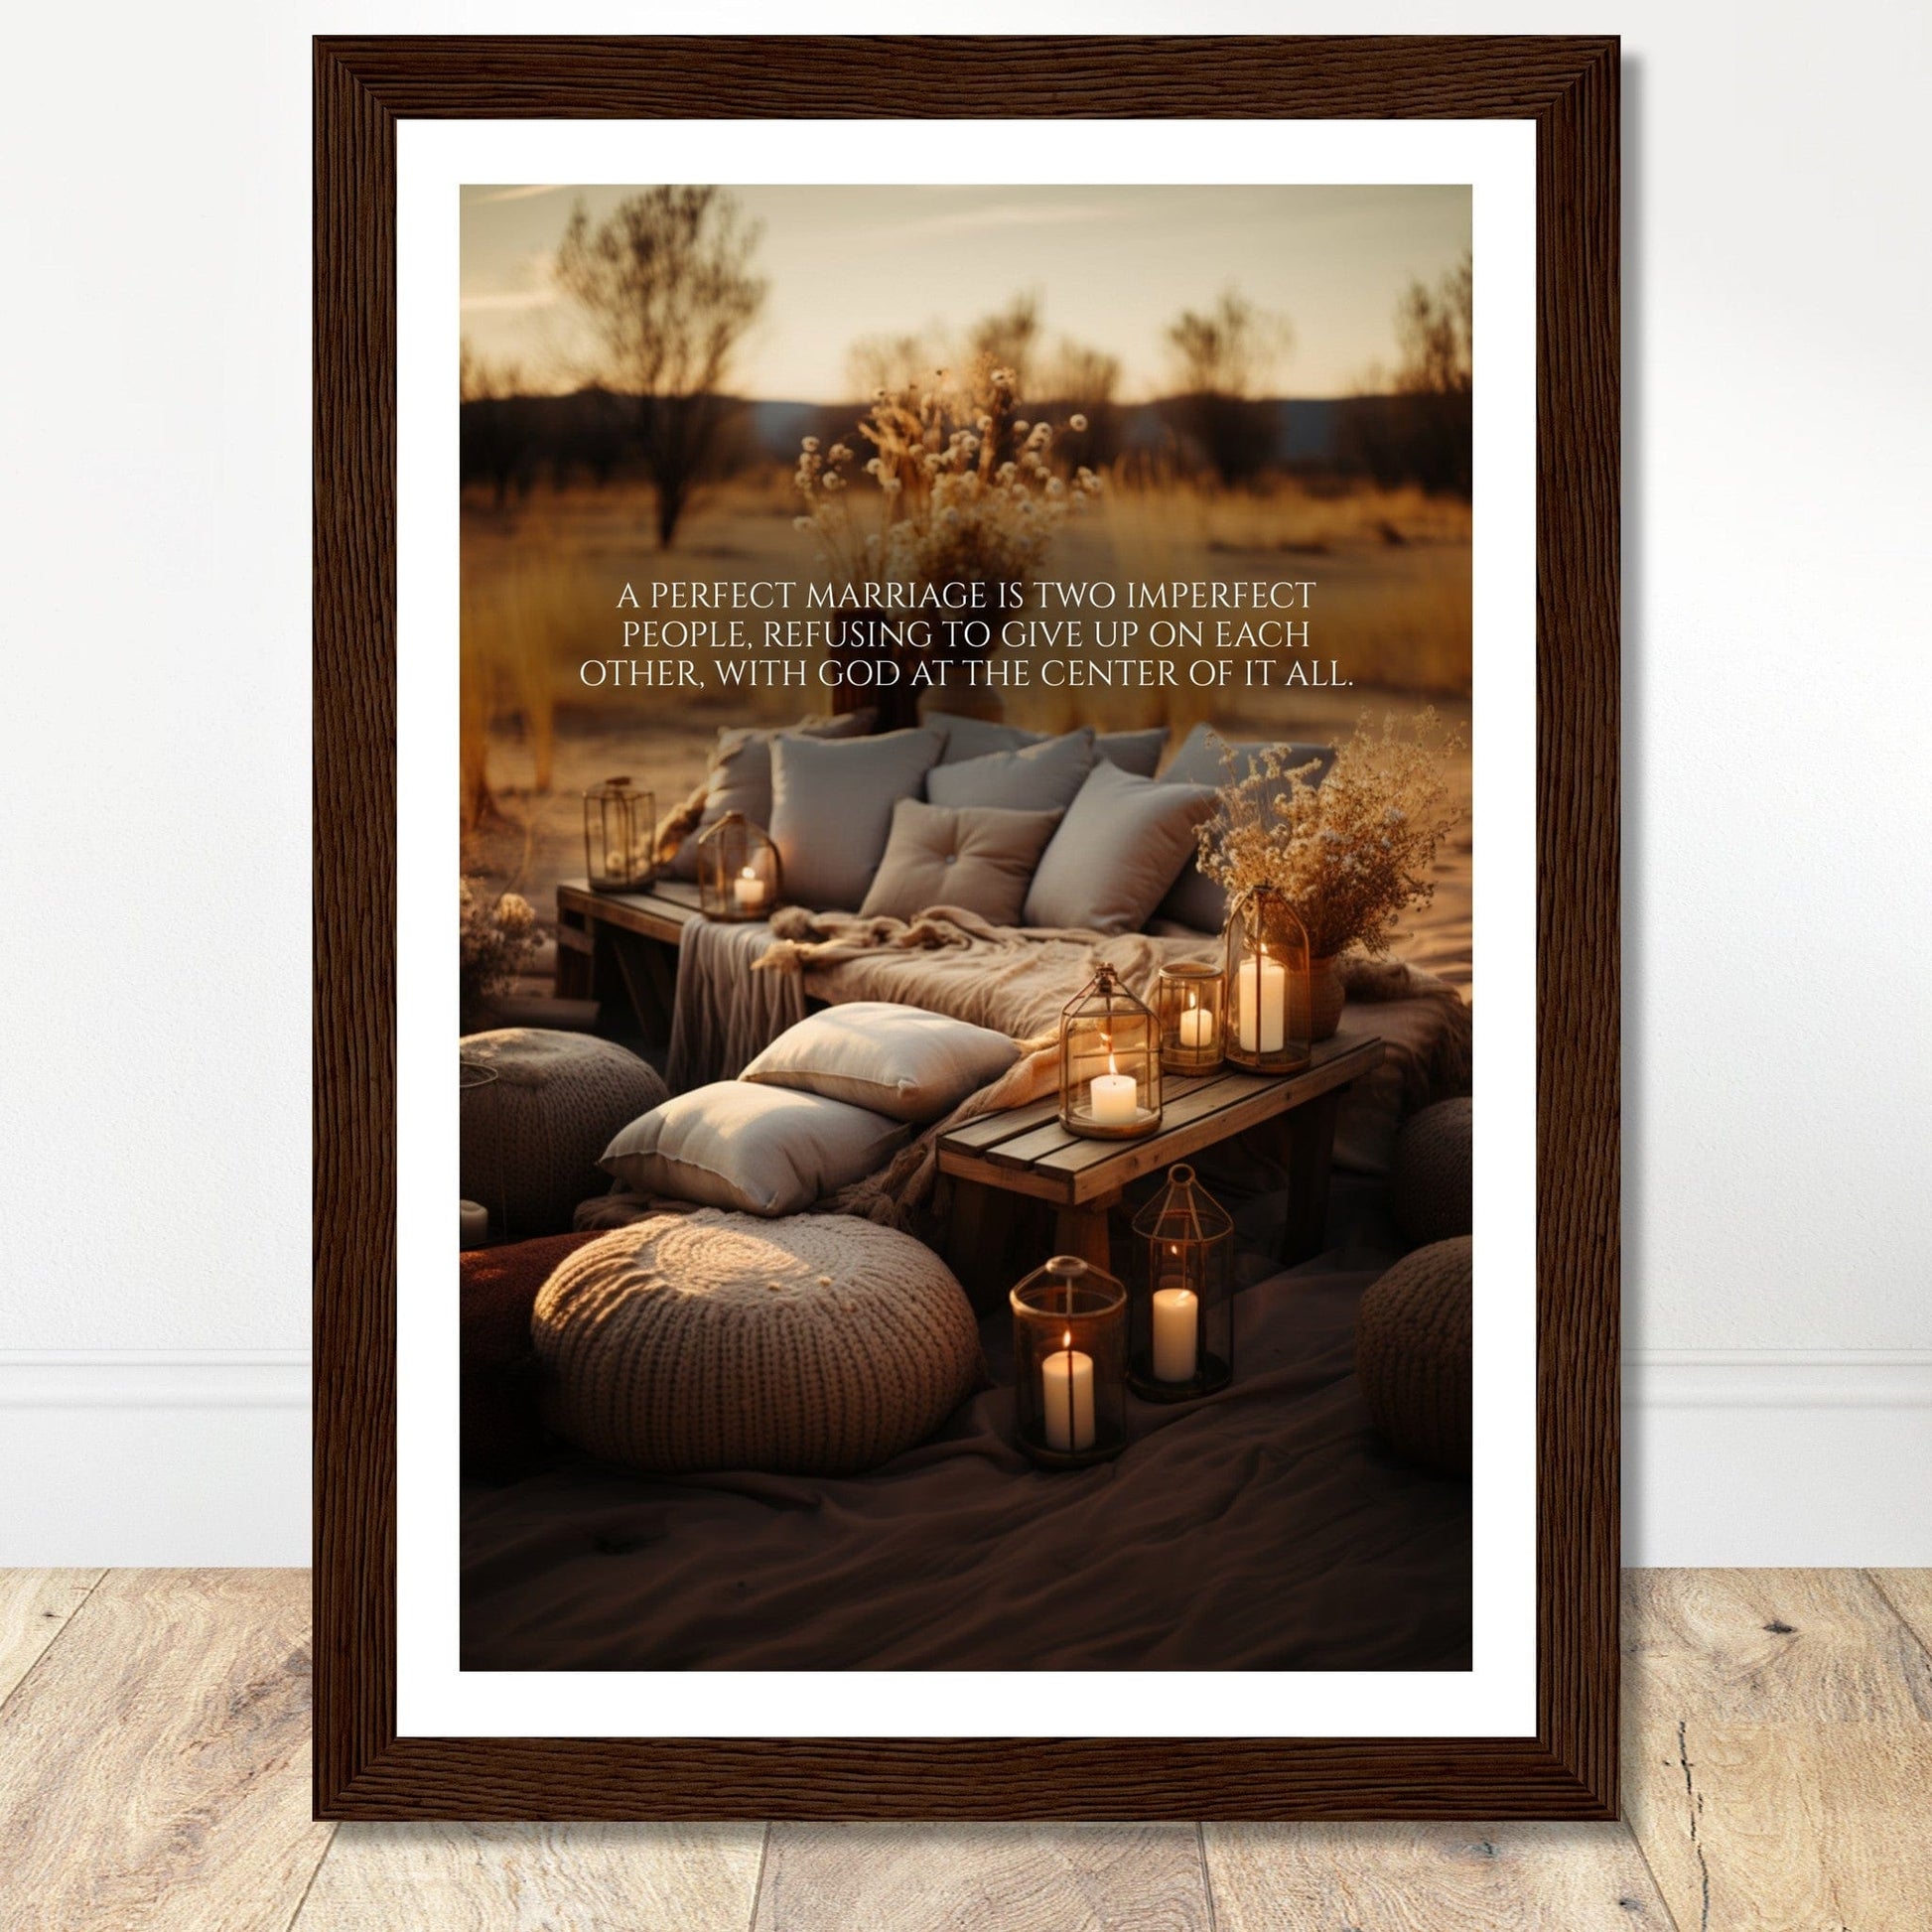 Coffee With My Father Print Material 21x29.7 cm / 8x12″ / Framed / Dark wood frame God-Centered Marriage - Custom Art